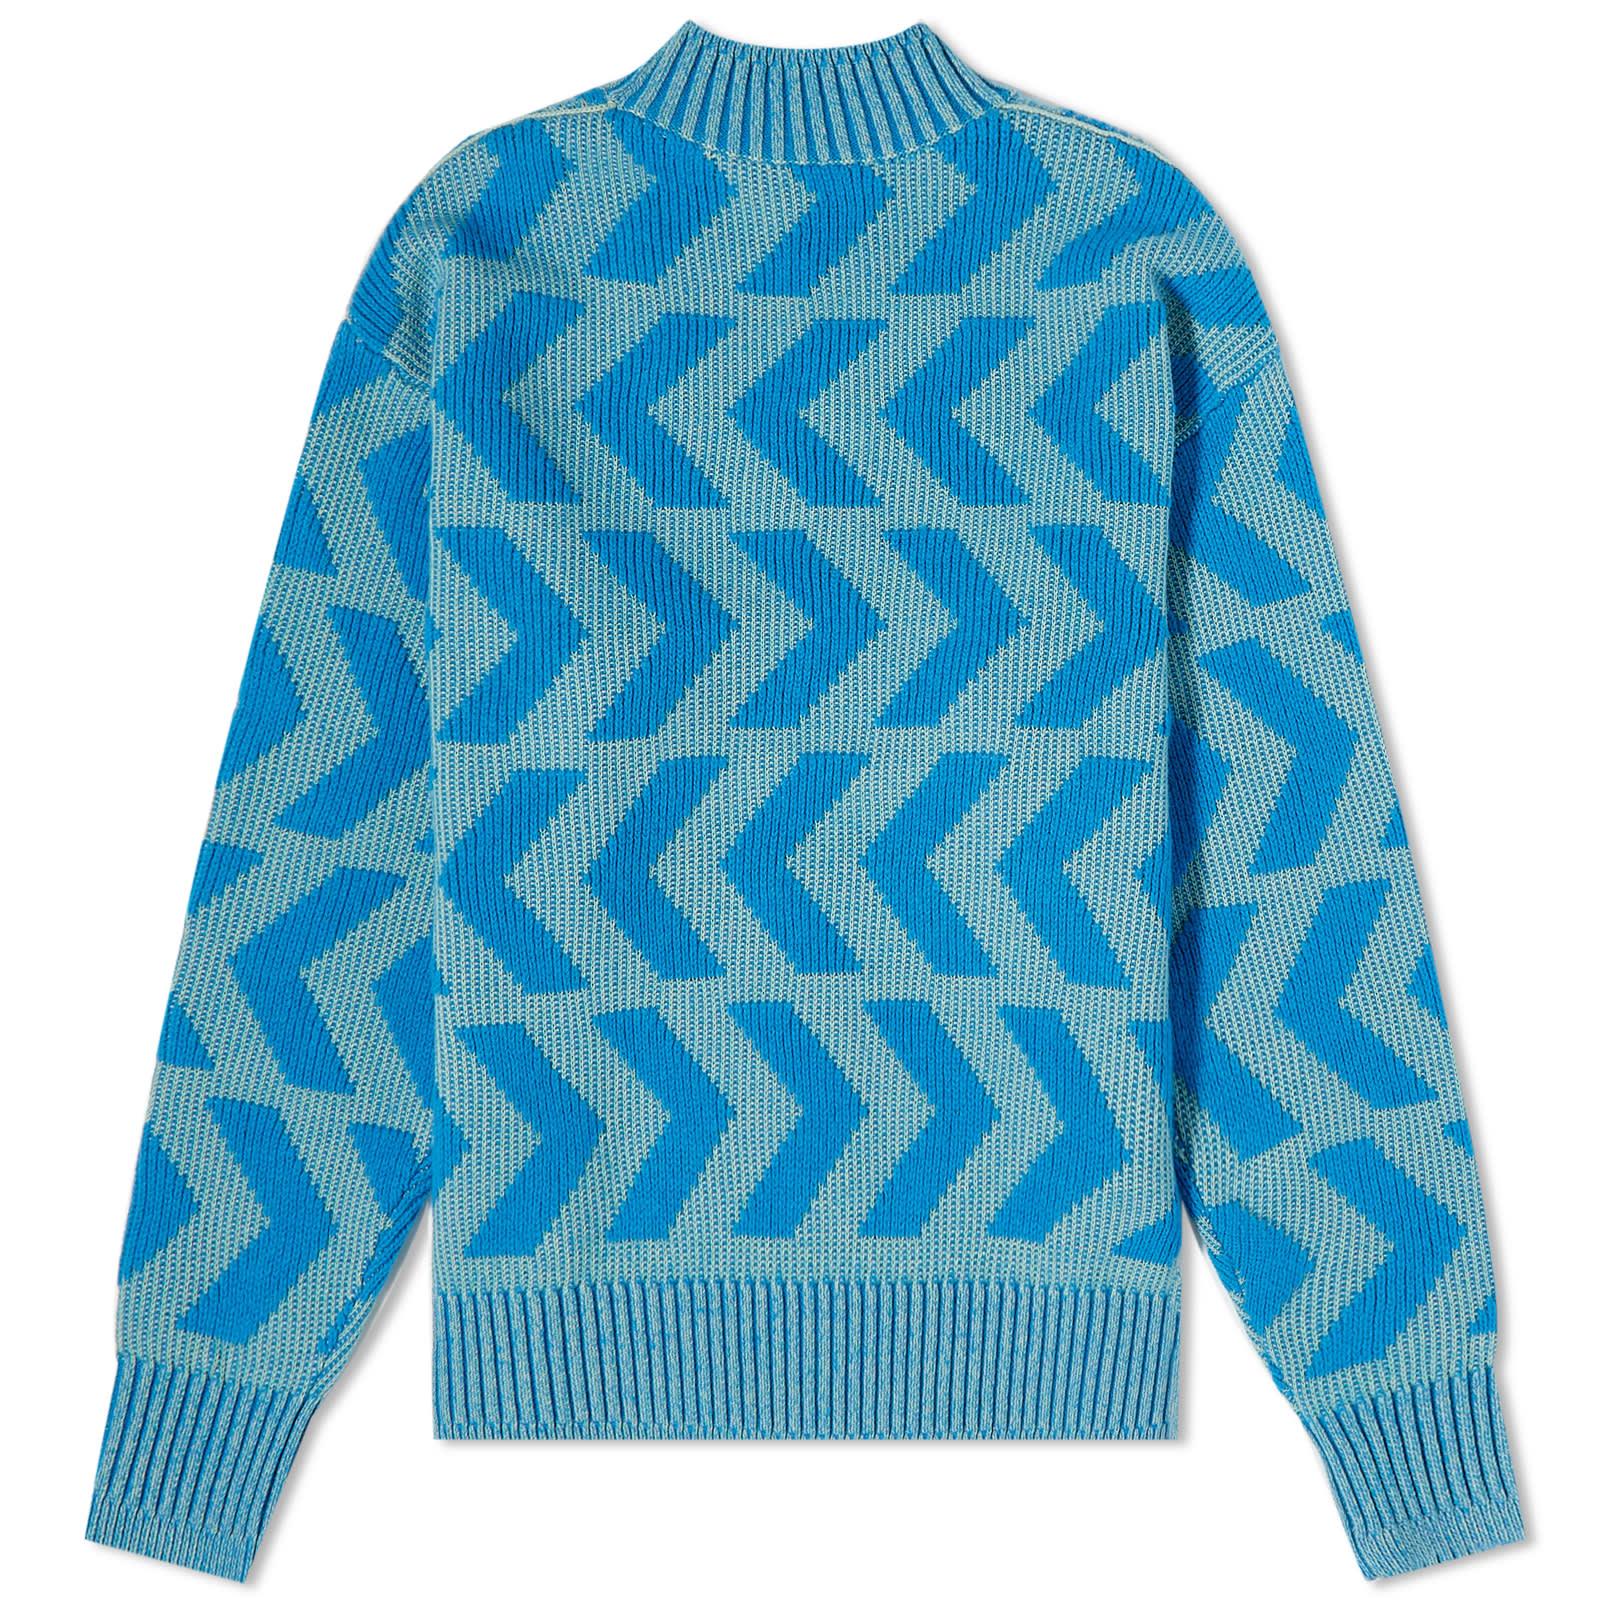 Acne Studios Keith Cross Bones Face Relaxed Crew Knit in Blue